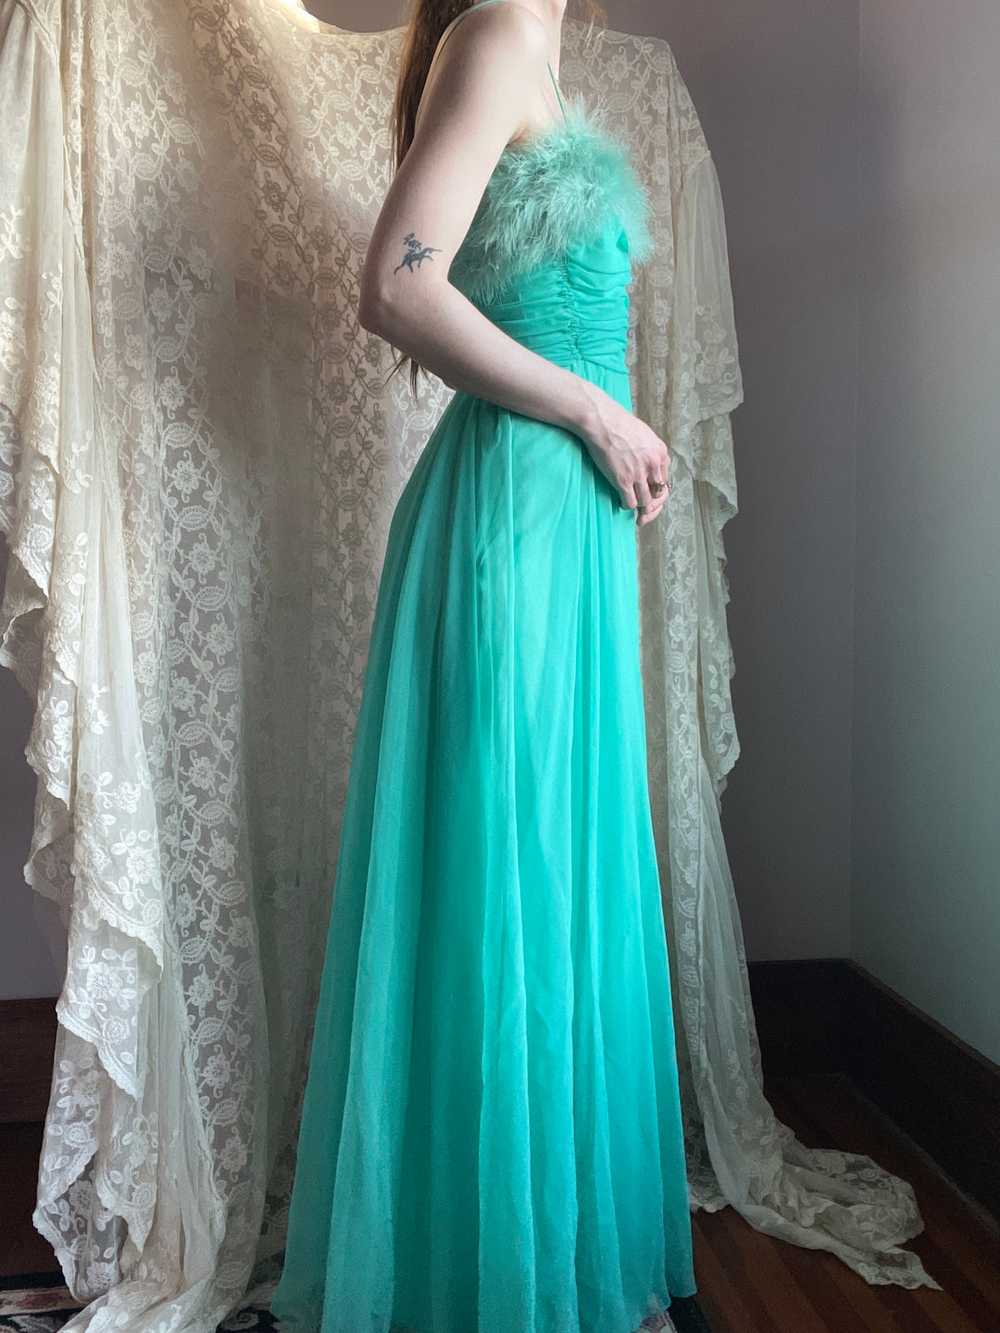 1960s Marabou Feather Green Chiffon Gown Dress - image 3